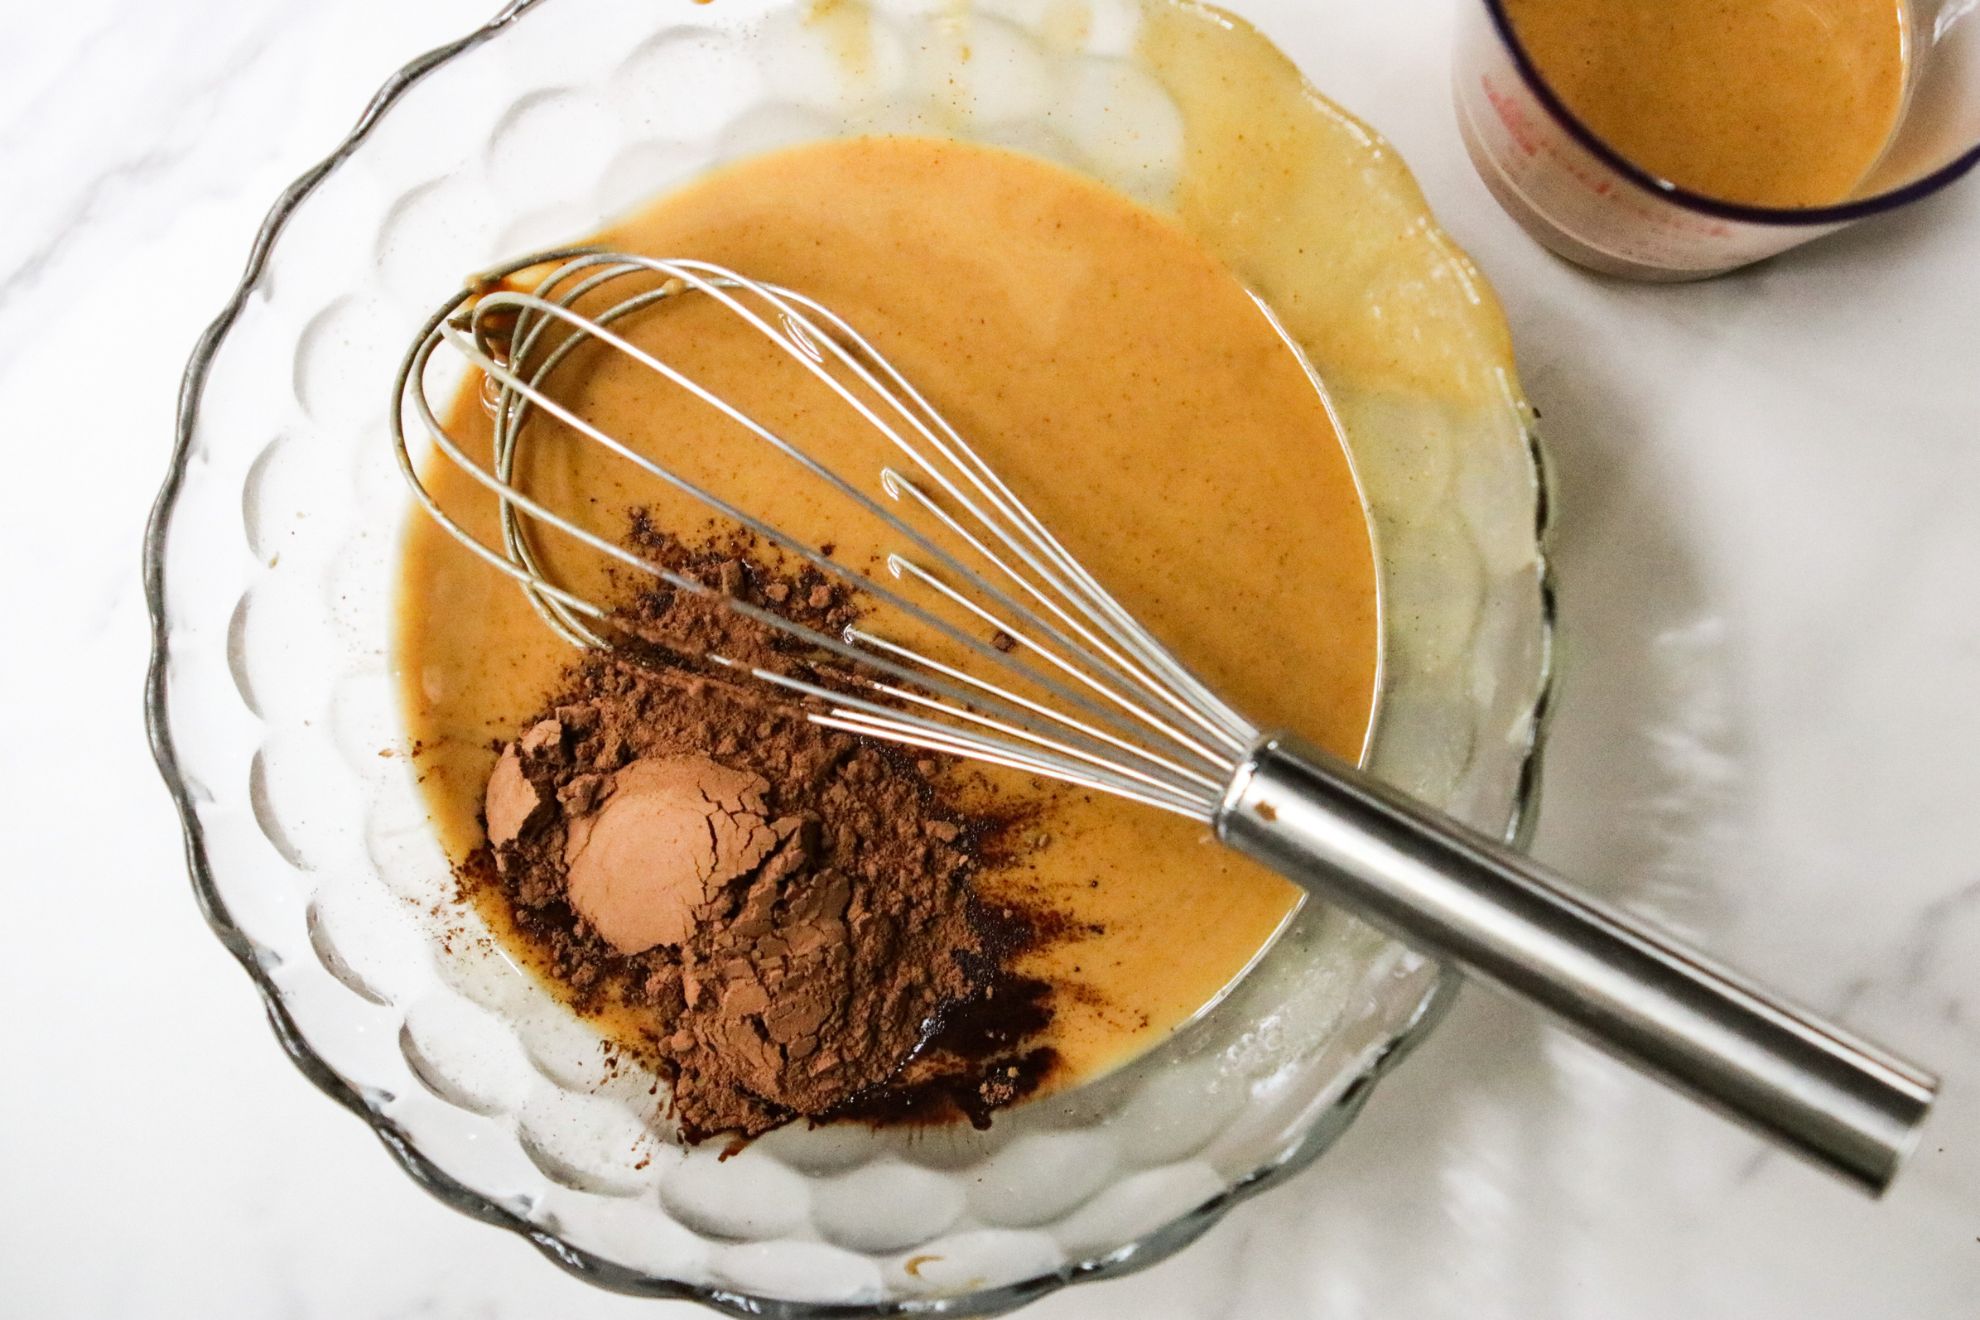 This is an overhead image of a glass bowl on a white counter. Inside the bowl is melted peanut butter and cocoa powder and a whisk. Off to the top right of the image is a measuring cup with some of the peanut butter mixture.